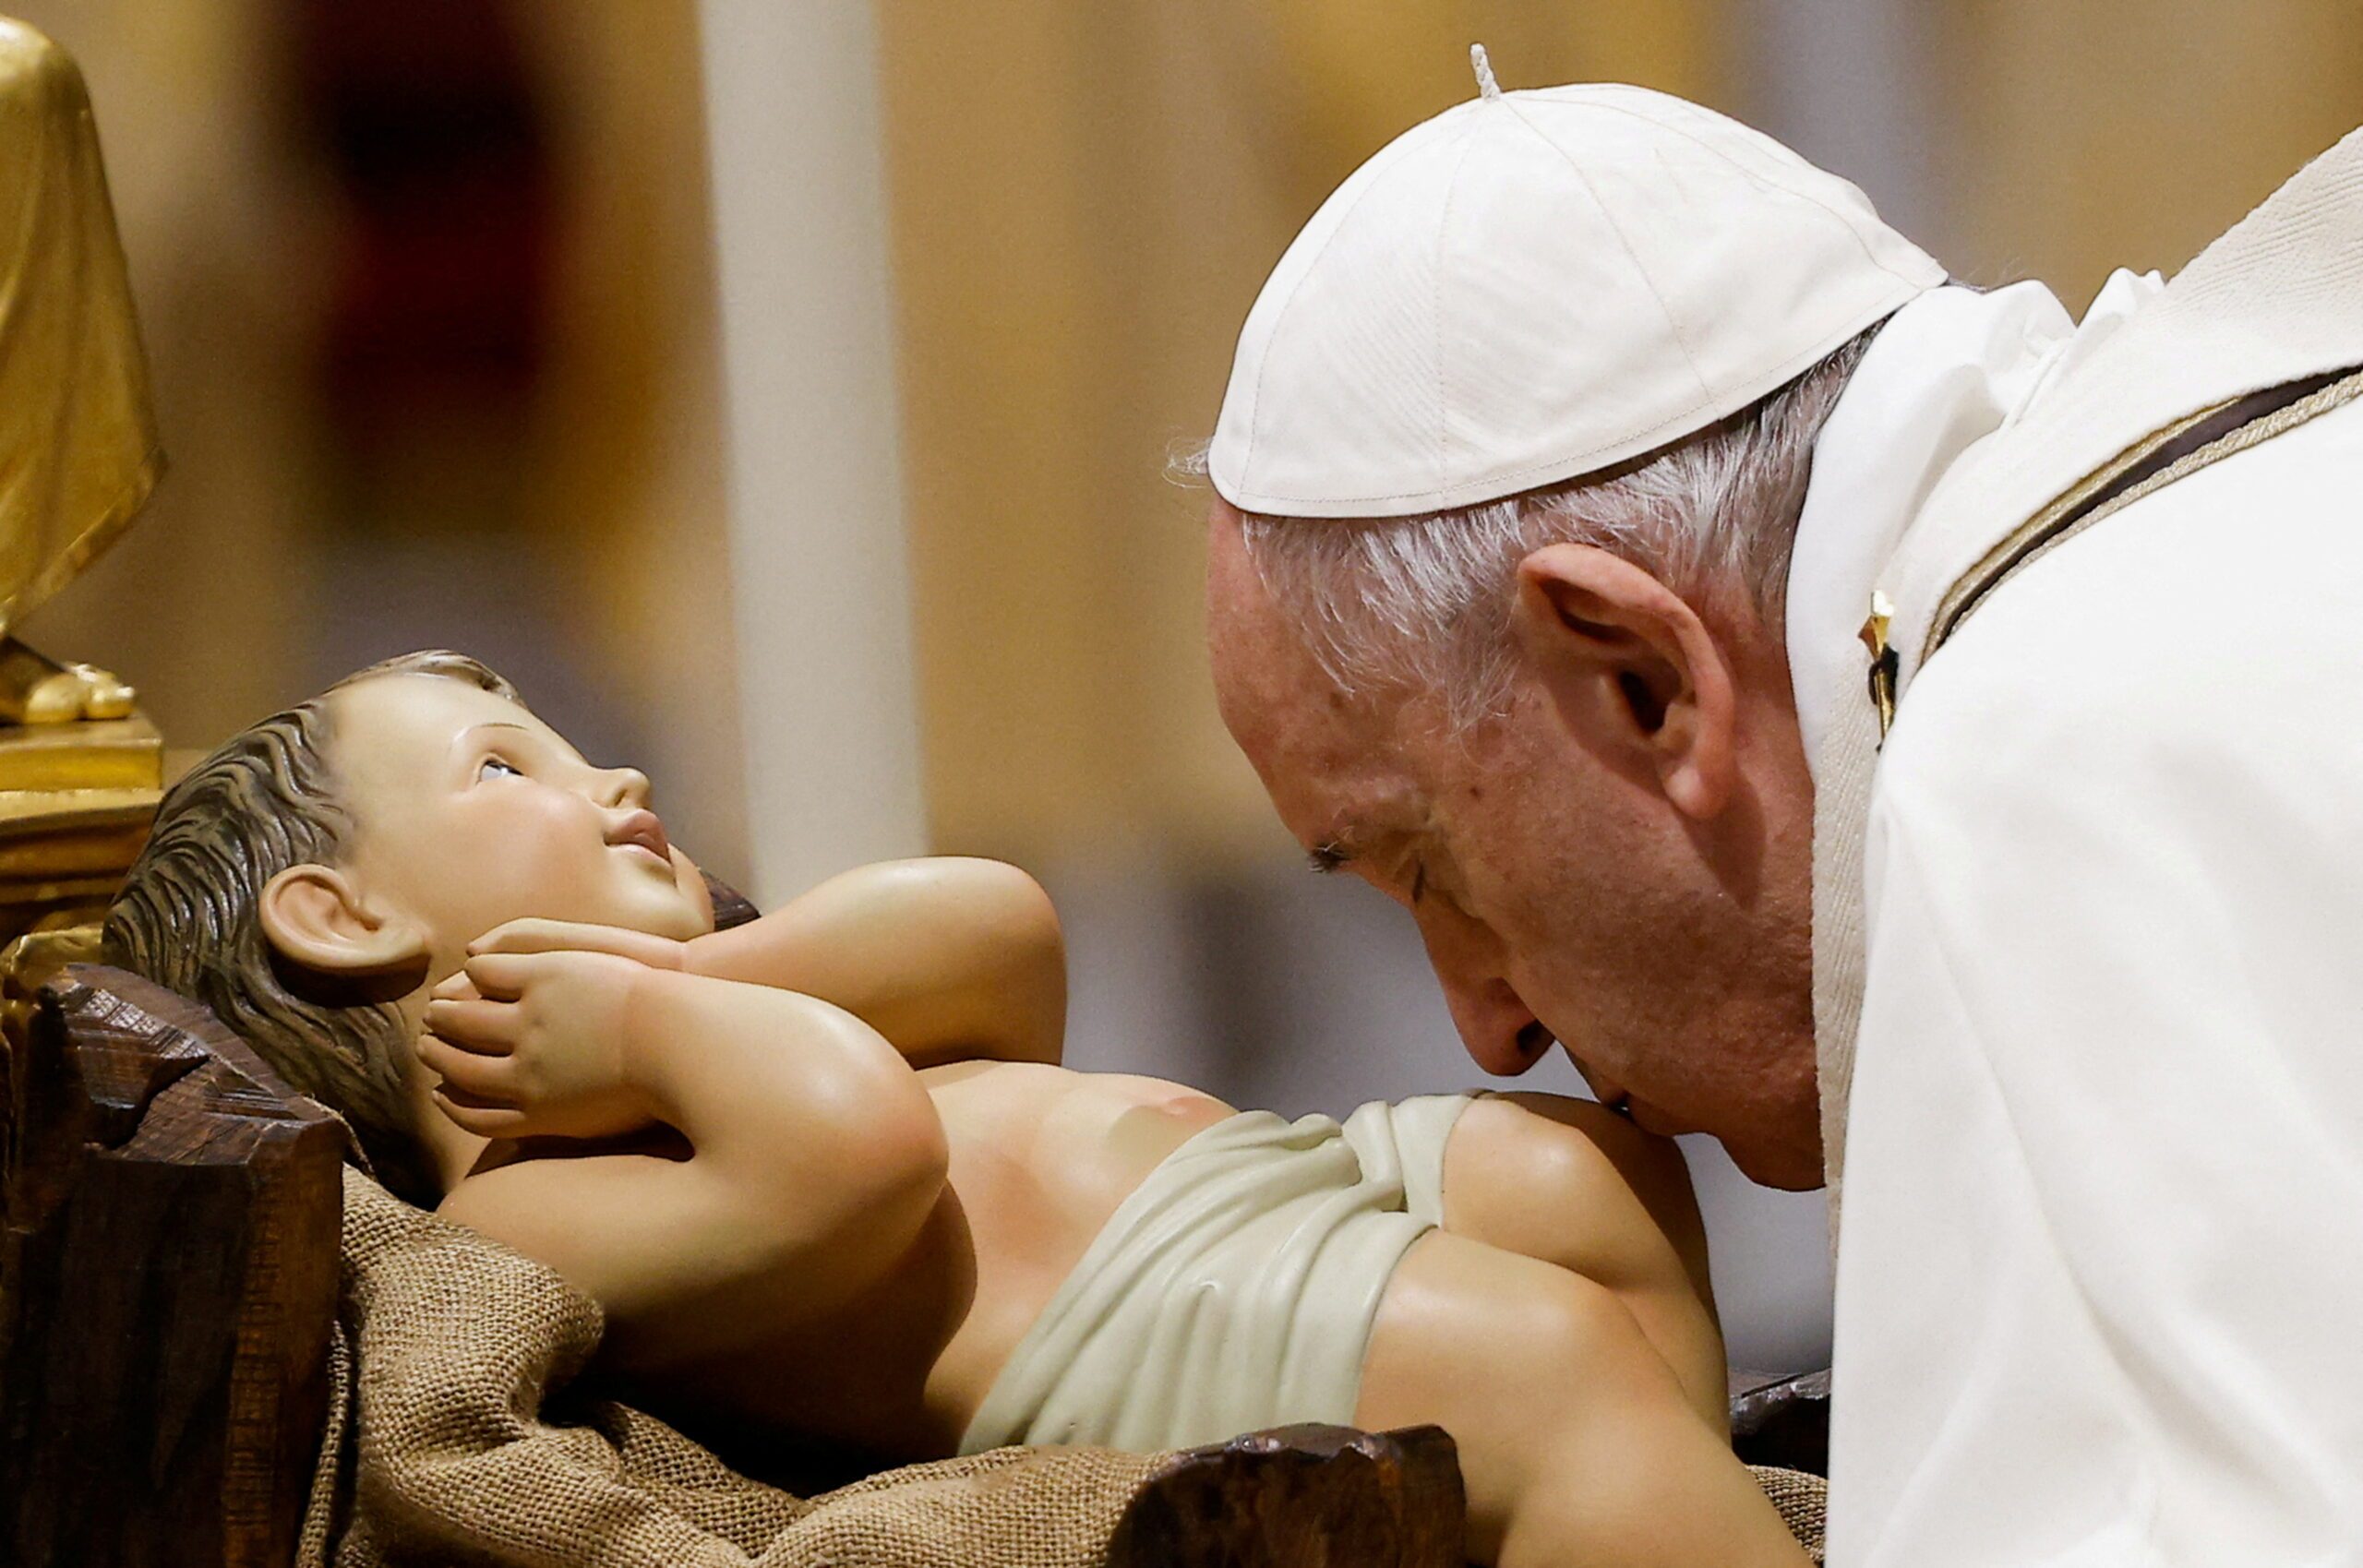 Look beyond the lights and remember the poor, pope says on Christmas eve